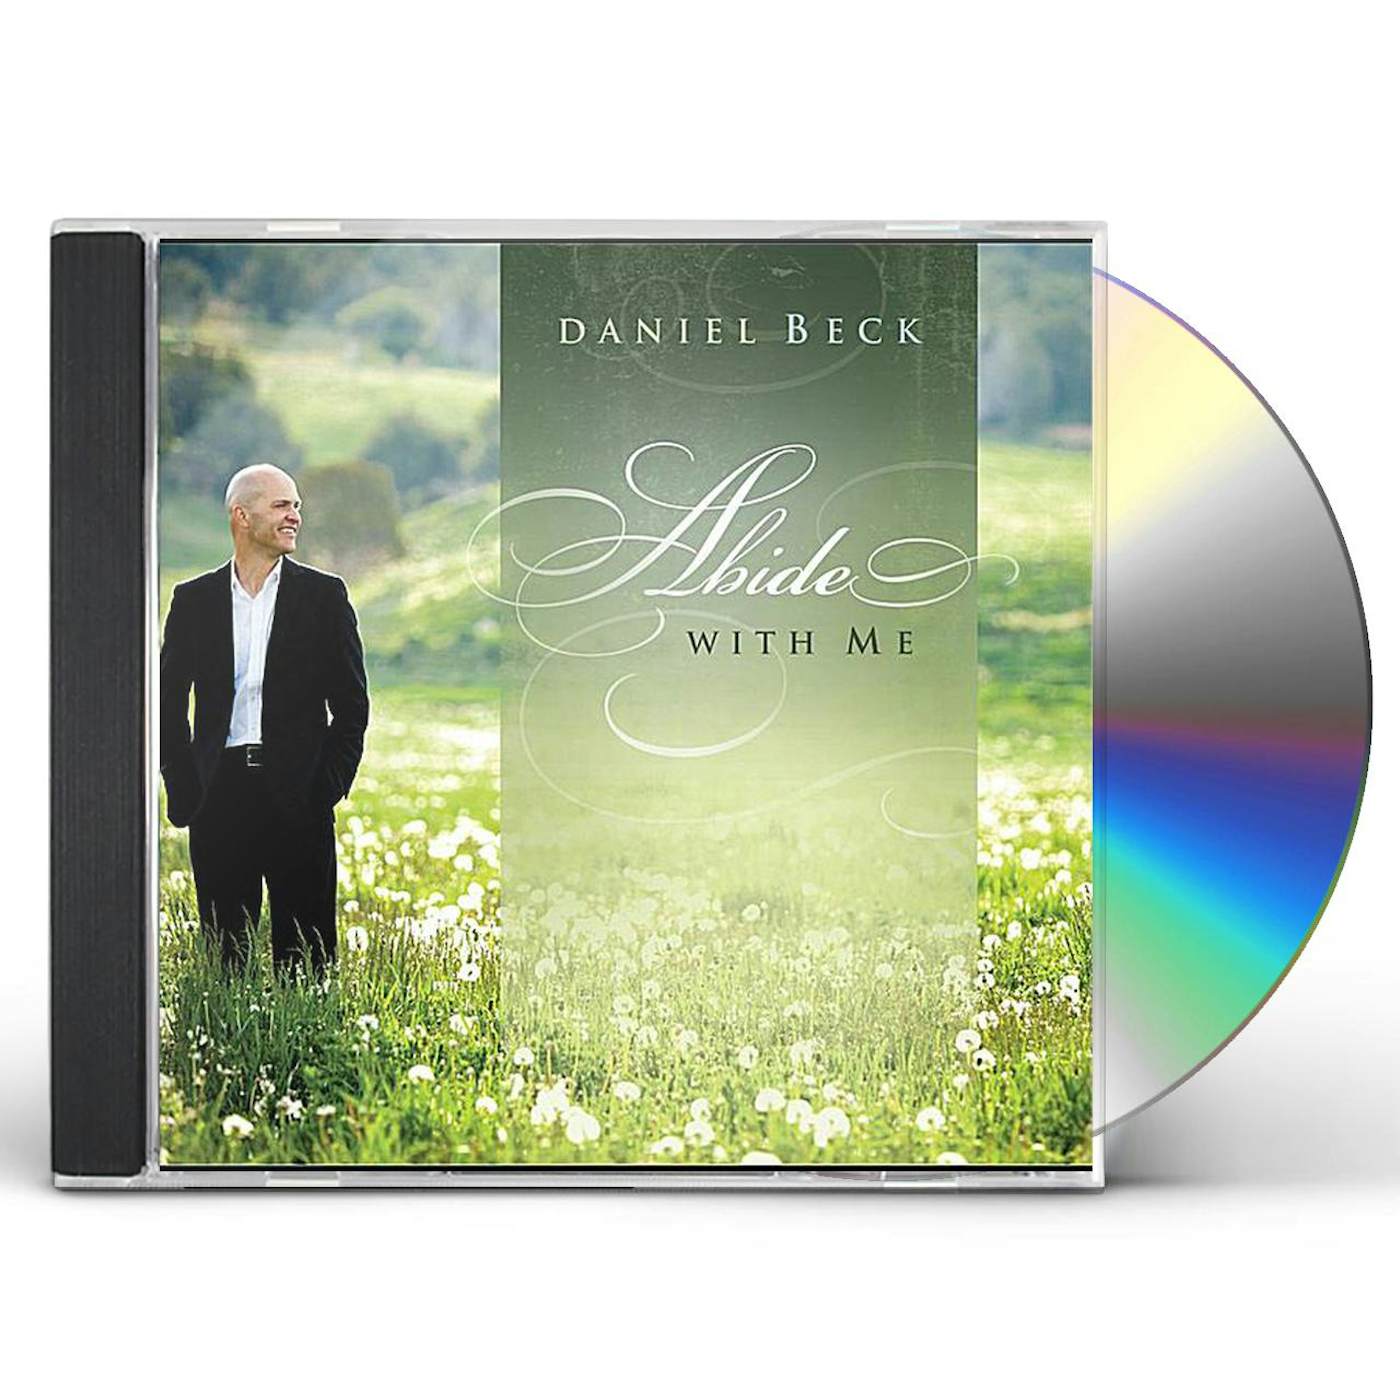 Daniel Beck ABIDE WITH ME CD